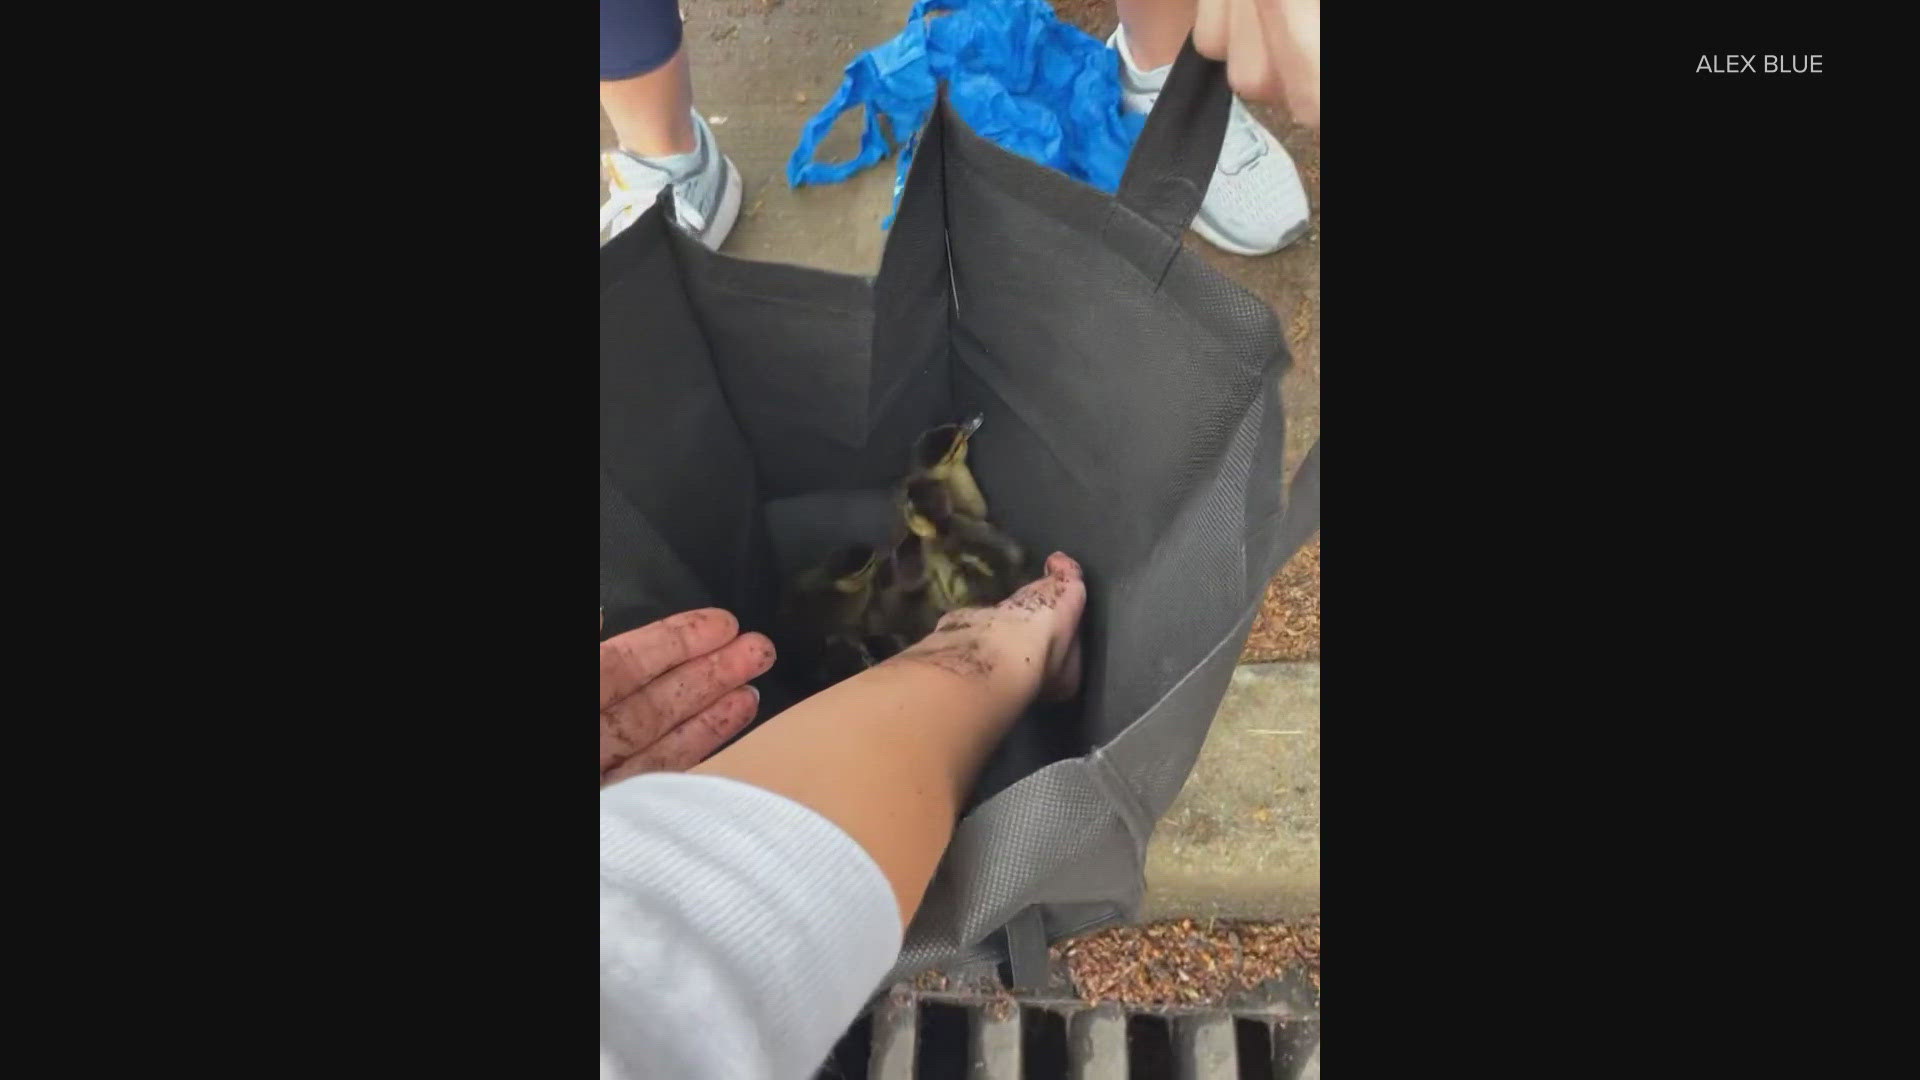 One of the people used a kitchen ladle to help pull the ducklings out.